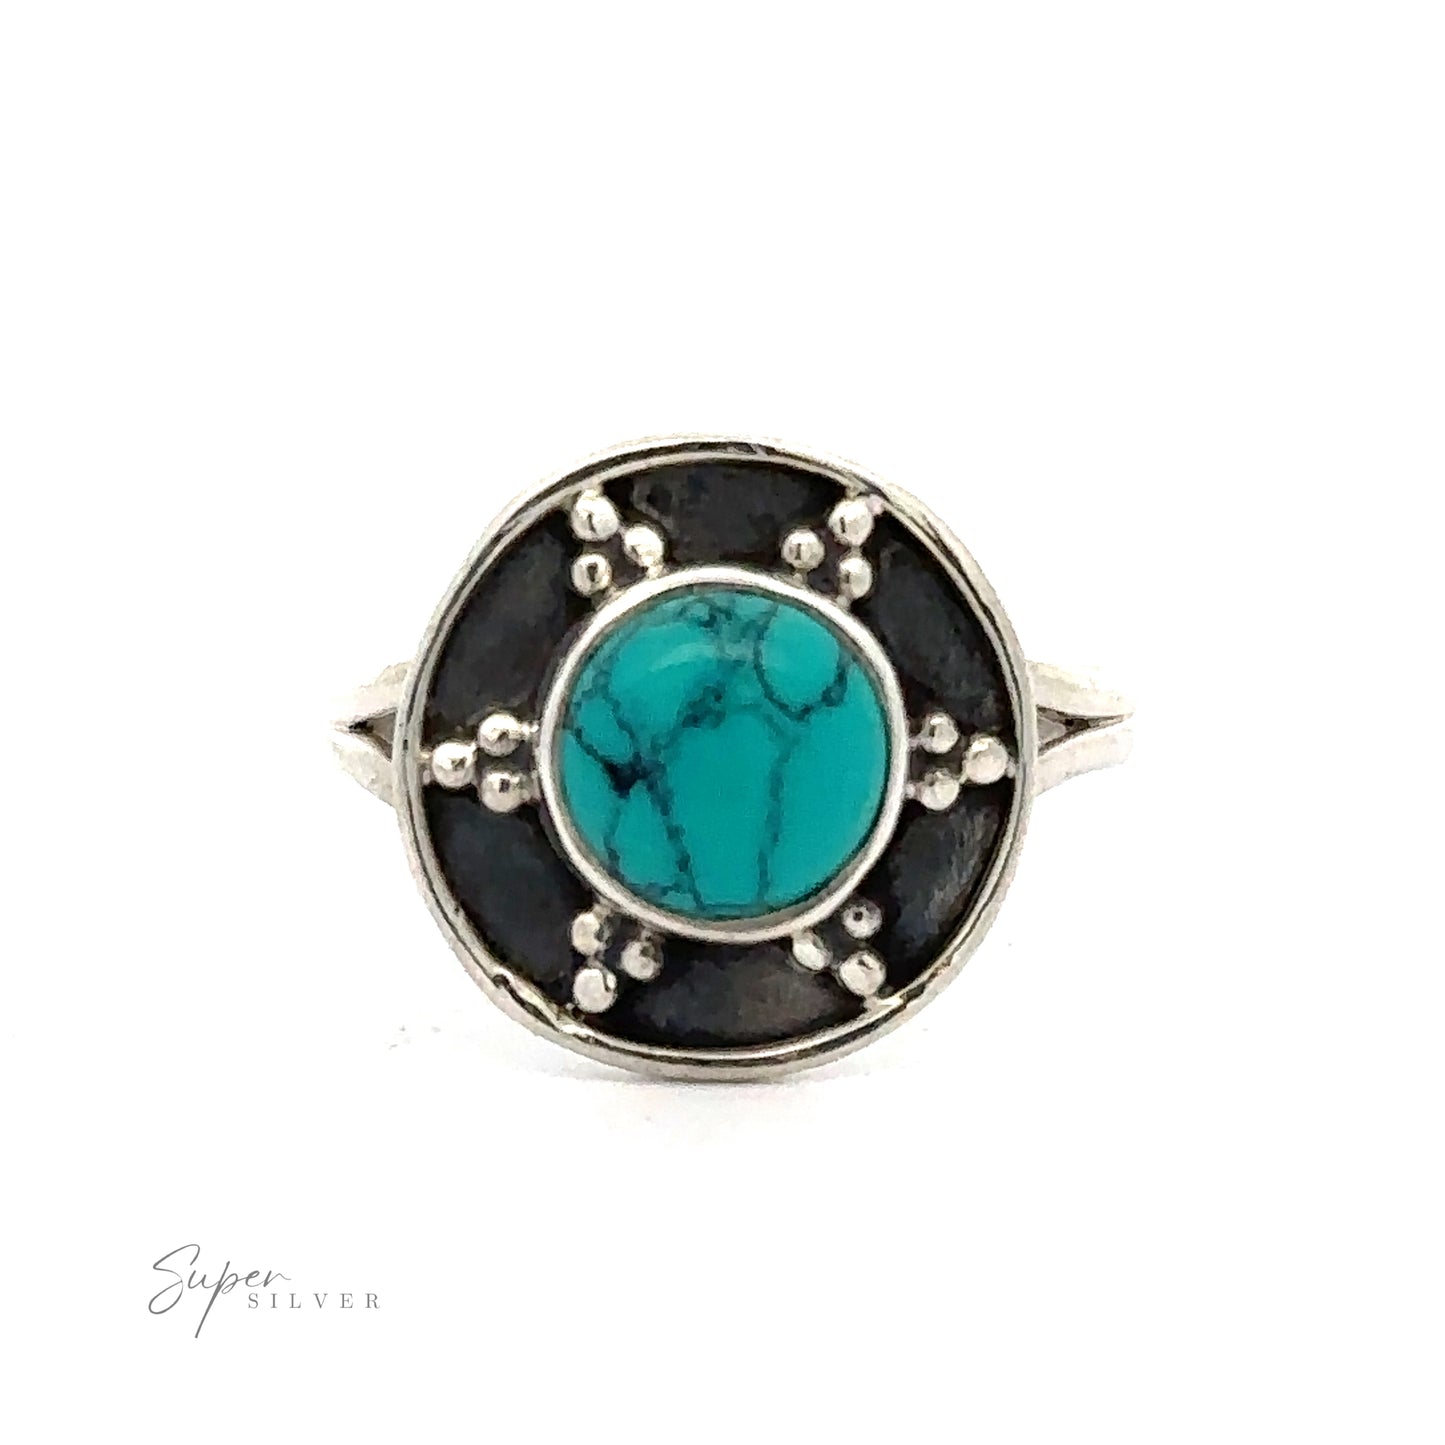 
                  
                    A Gemstone Ring With Unique Oxidized Design with a round turquoise stone in the center, surrounded by an oxidized silver design and silver dot accents. The ring is photographed against a white background.
                  
                